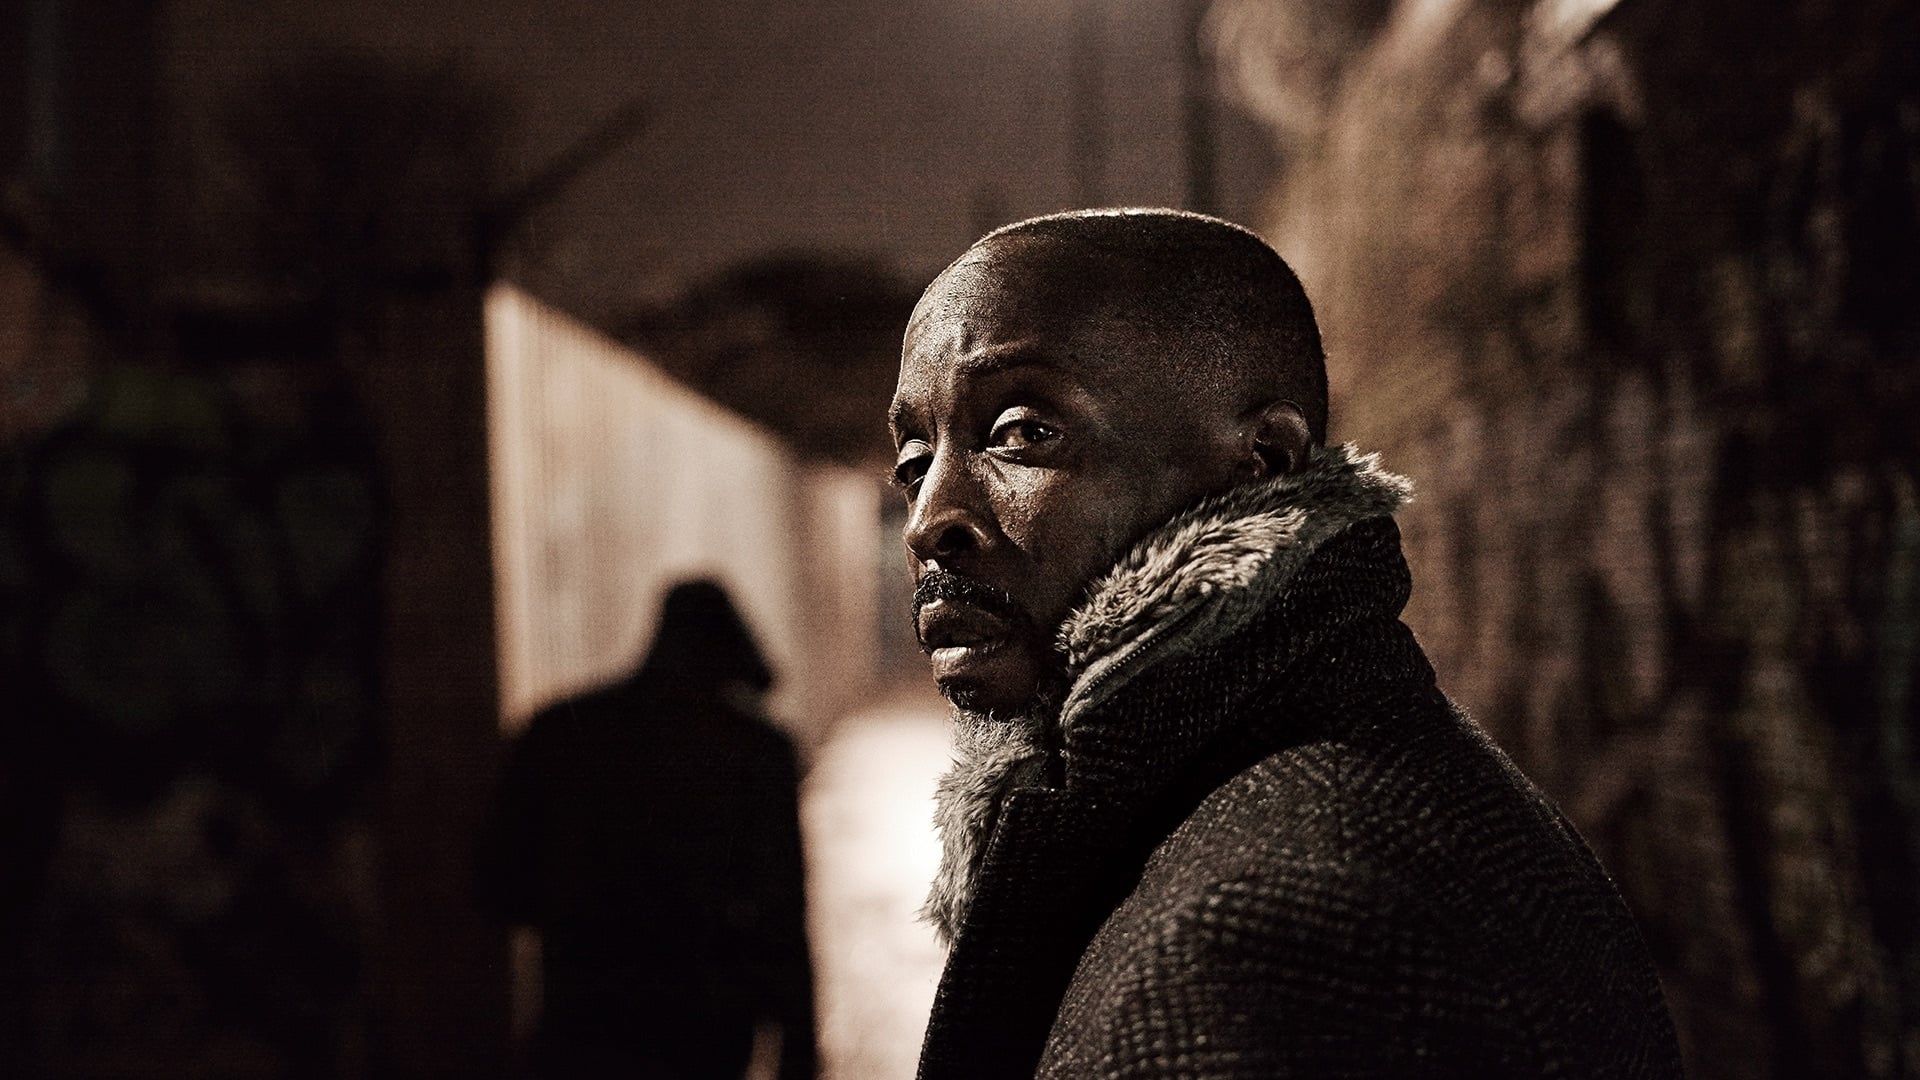 Black Market with Michael K. Williams background